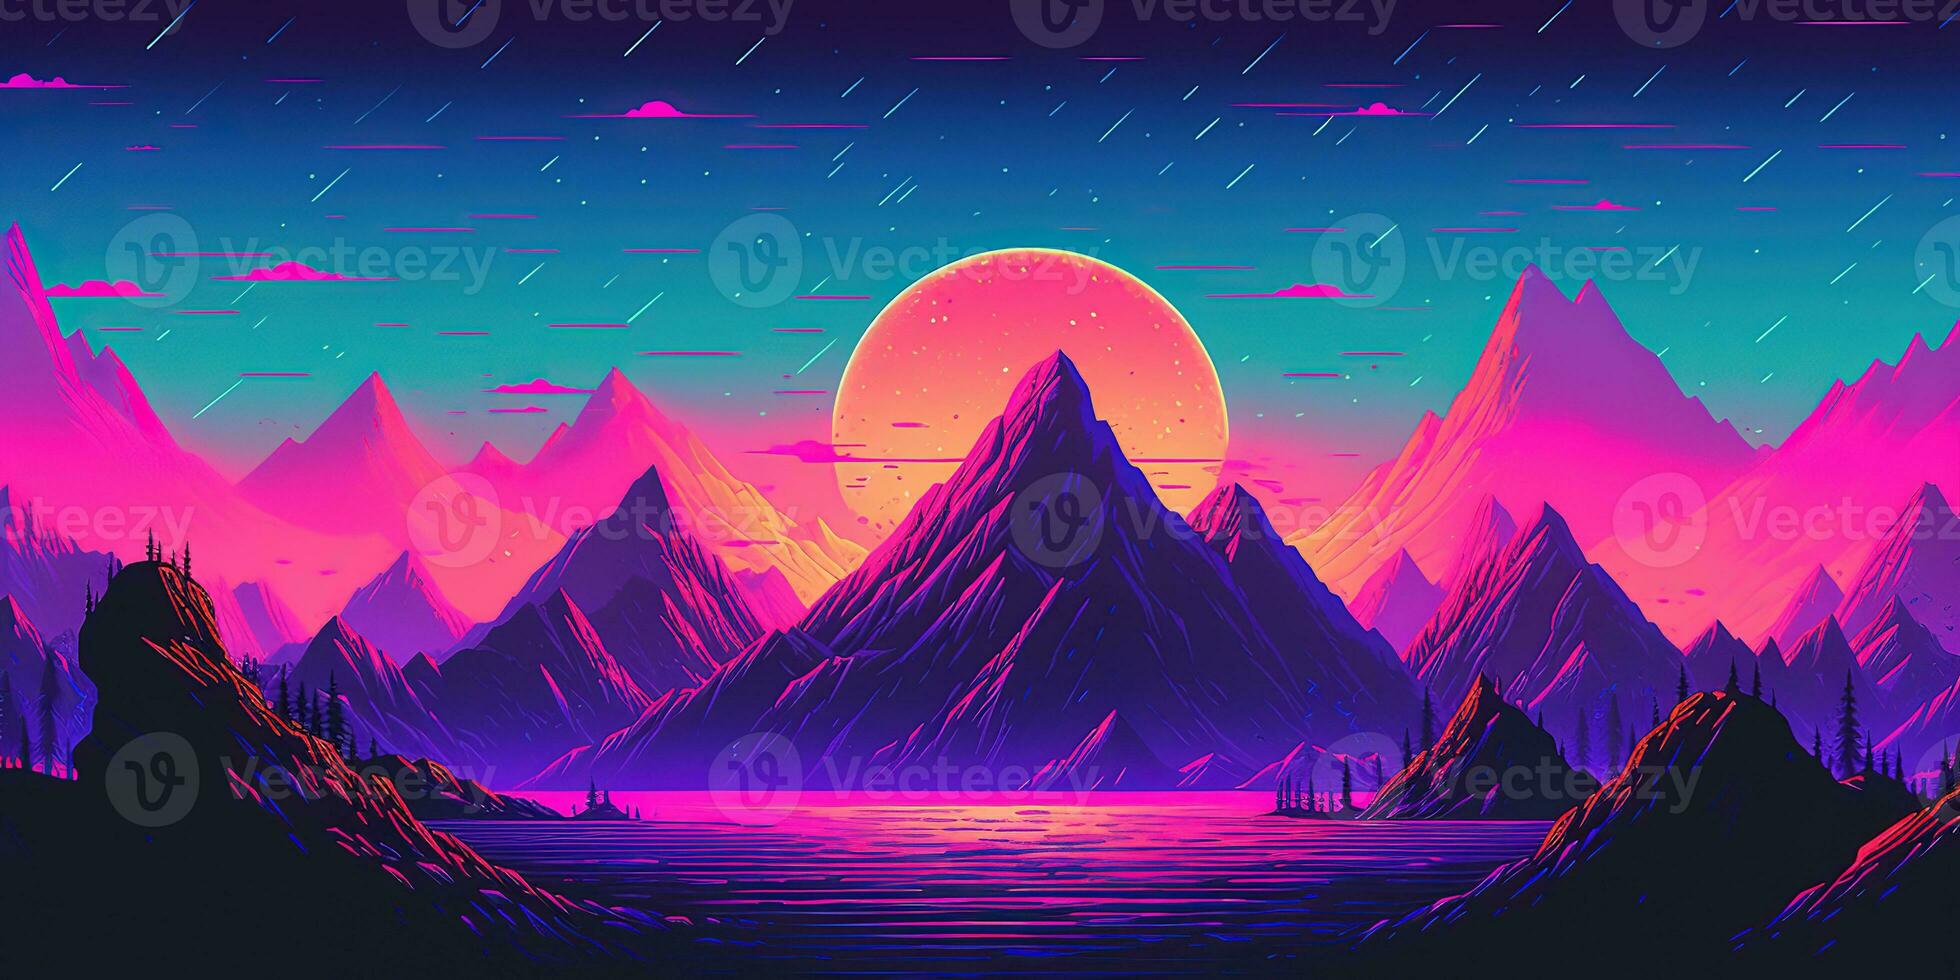  Neon Coole Hintergrundbild 1960x980. Aesthetic mountain synthwave retrowave wallpaper with a cool and vibrant neon design, AI Generated